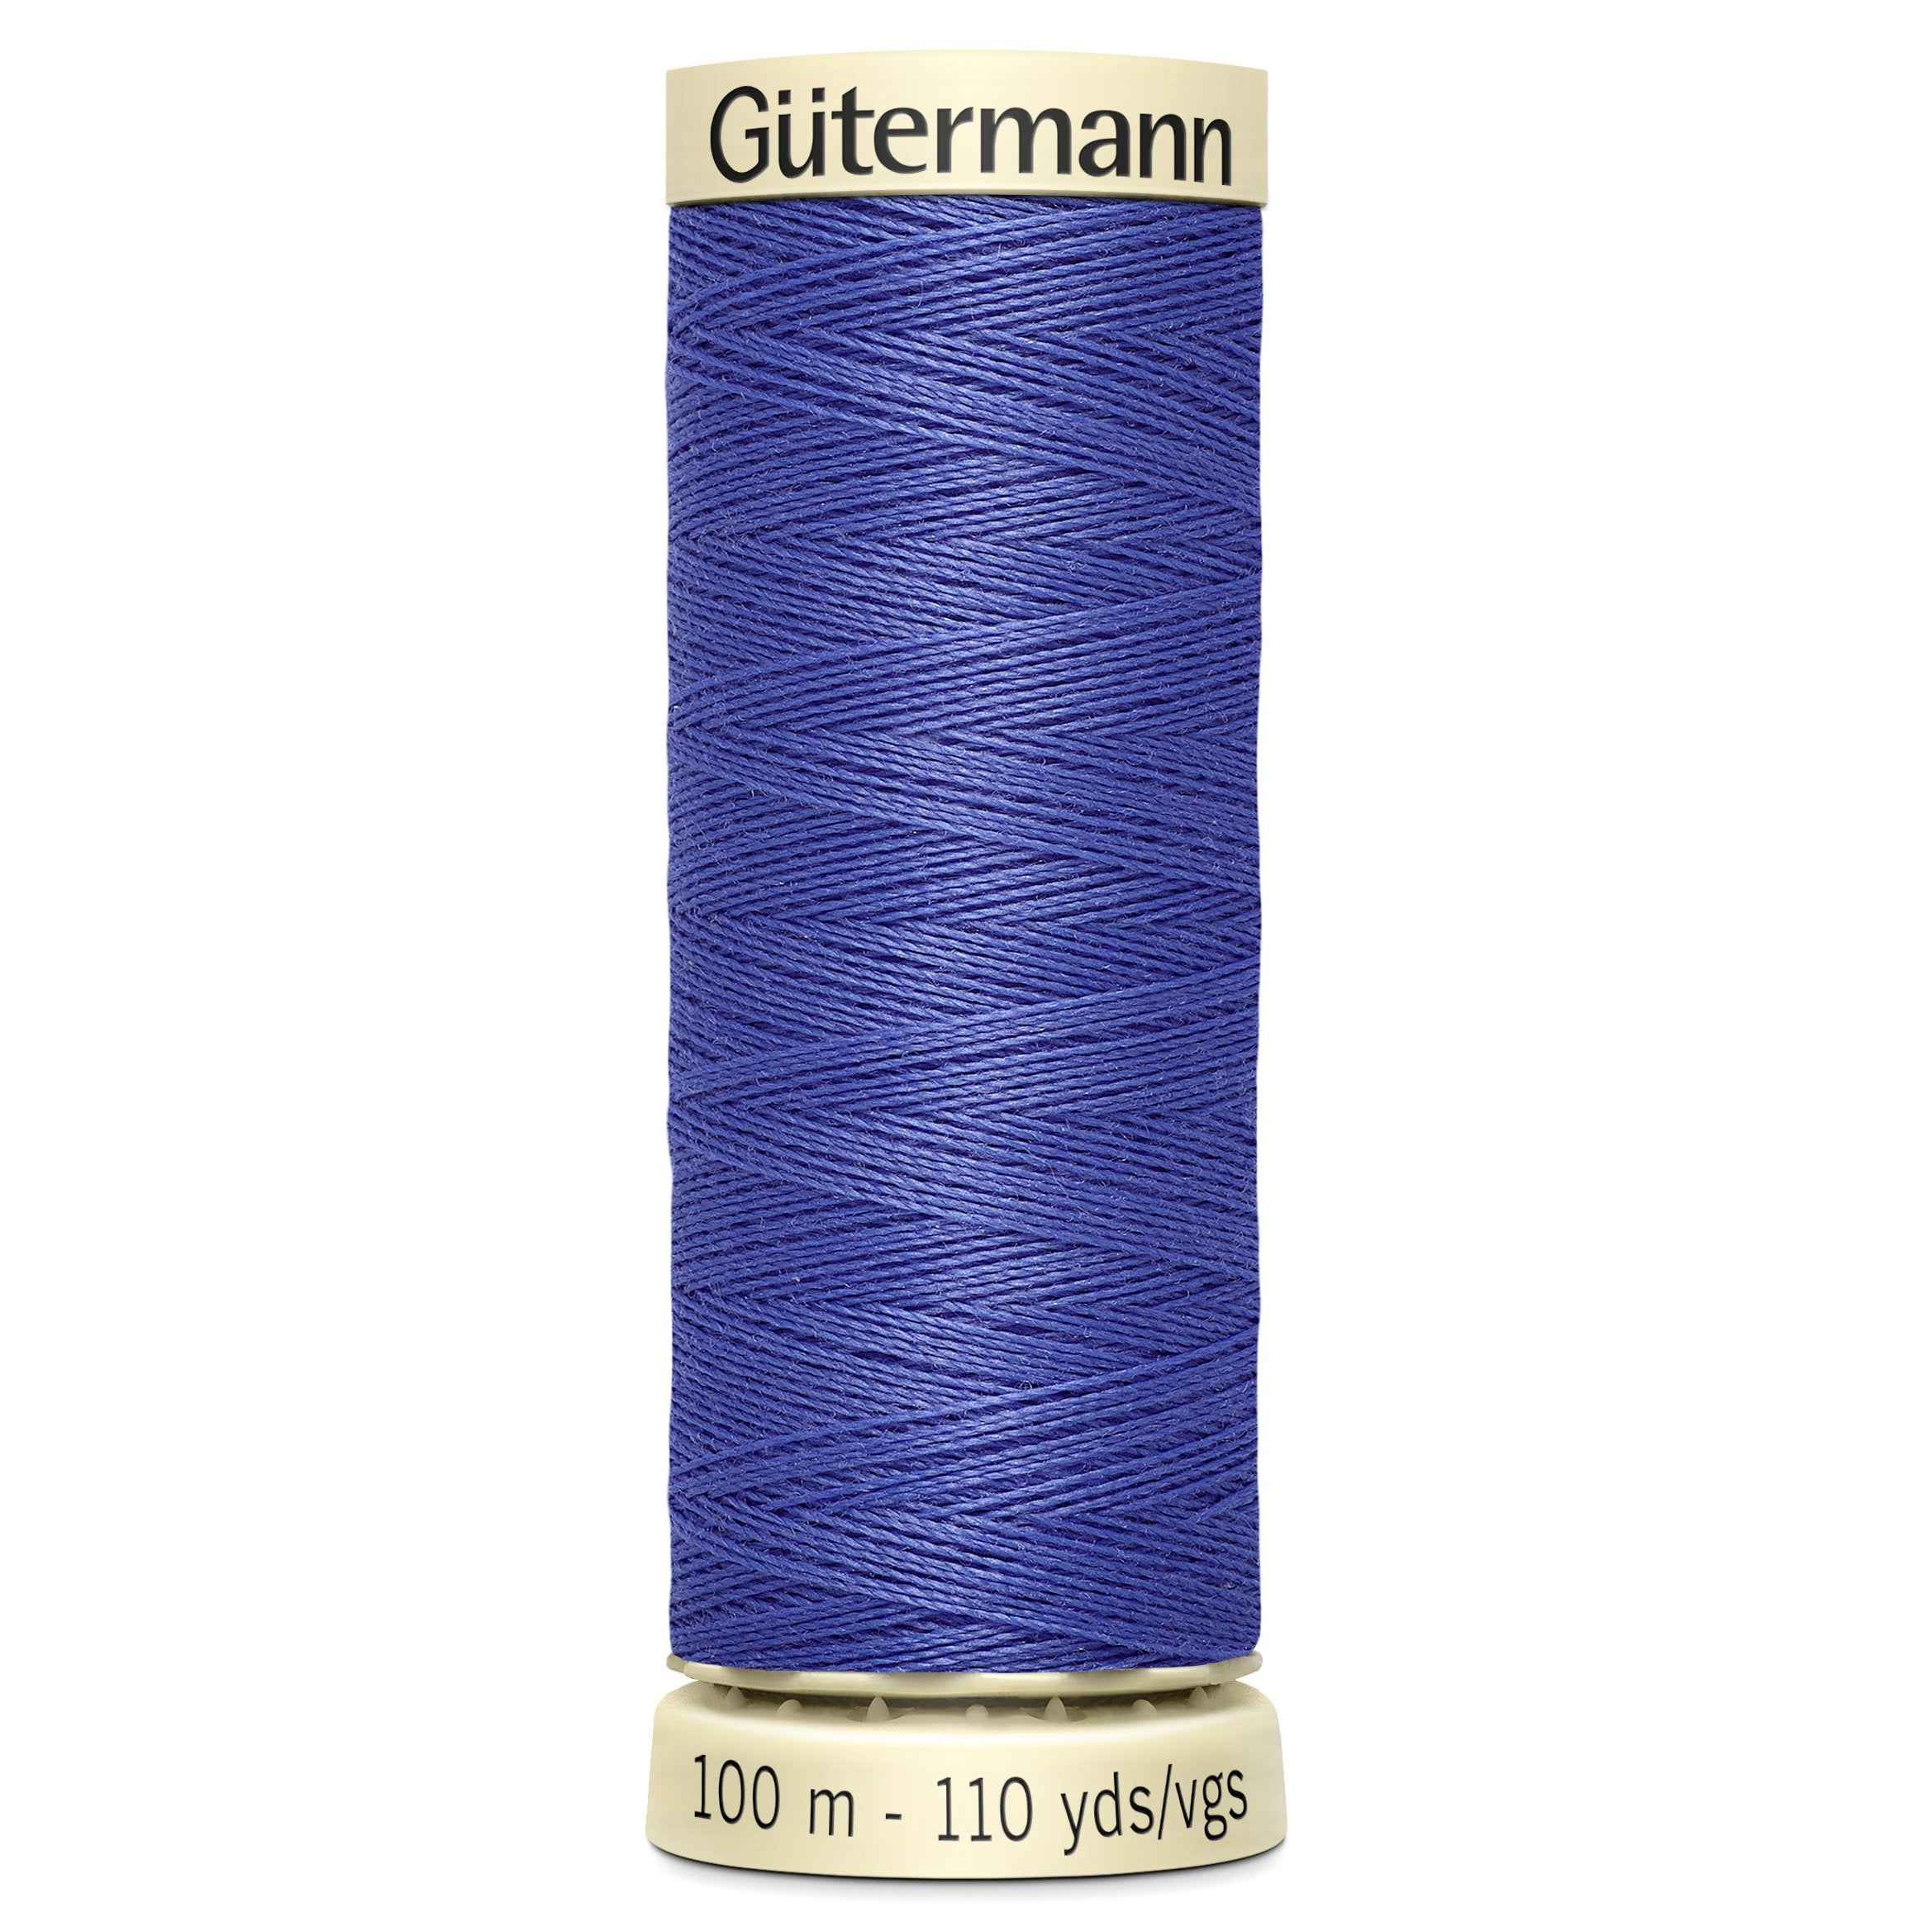 Gutermann Sew-All Polyester Sewing Thread 203 Violet from Jaycotts Sewing Supplies